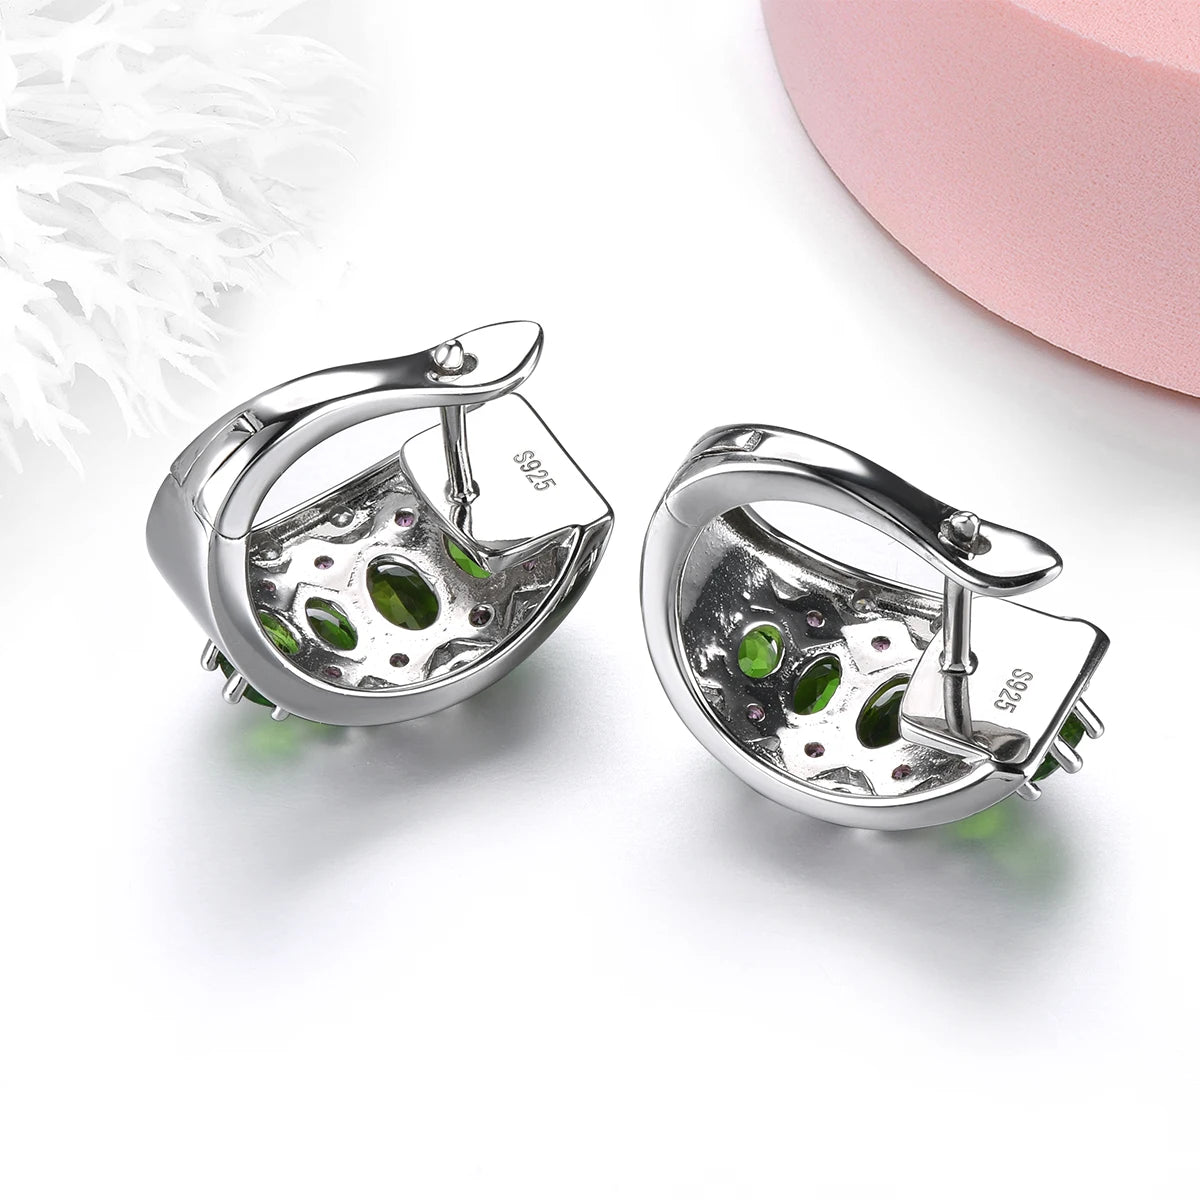 Natural Chrome Diopside Sterling Silver Clip Earring 3 Carats Multicolor Gemstone Exquisite Style S925 Jewelry New Year Gifts